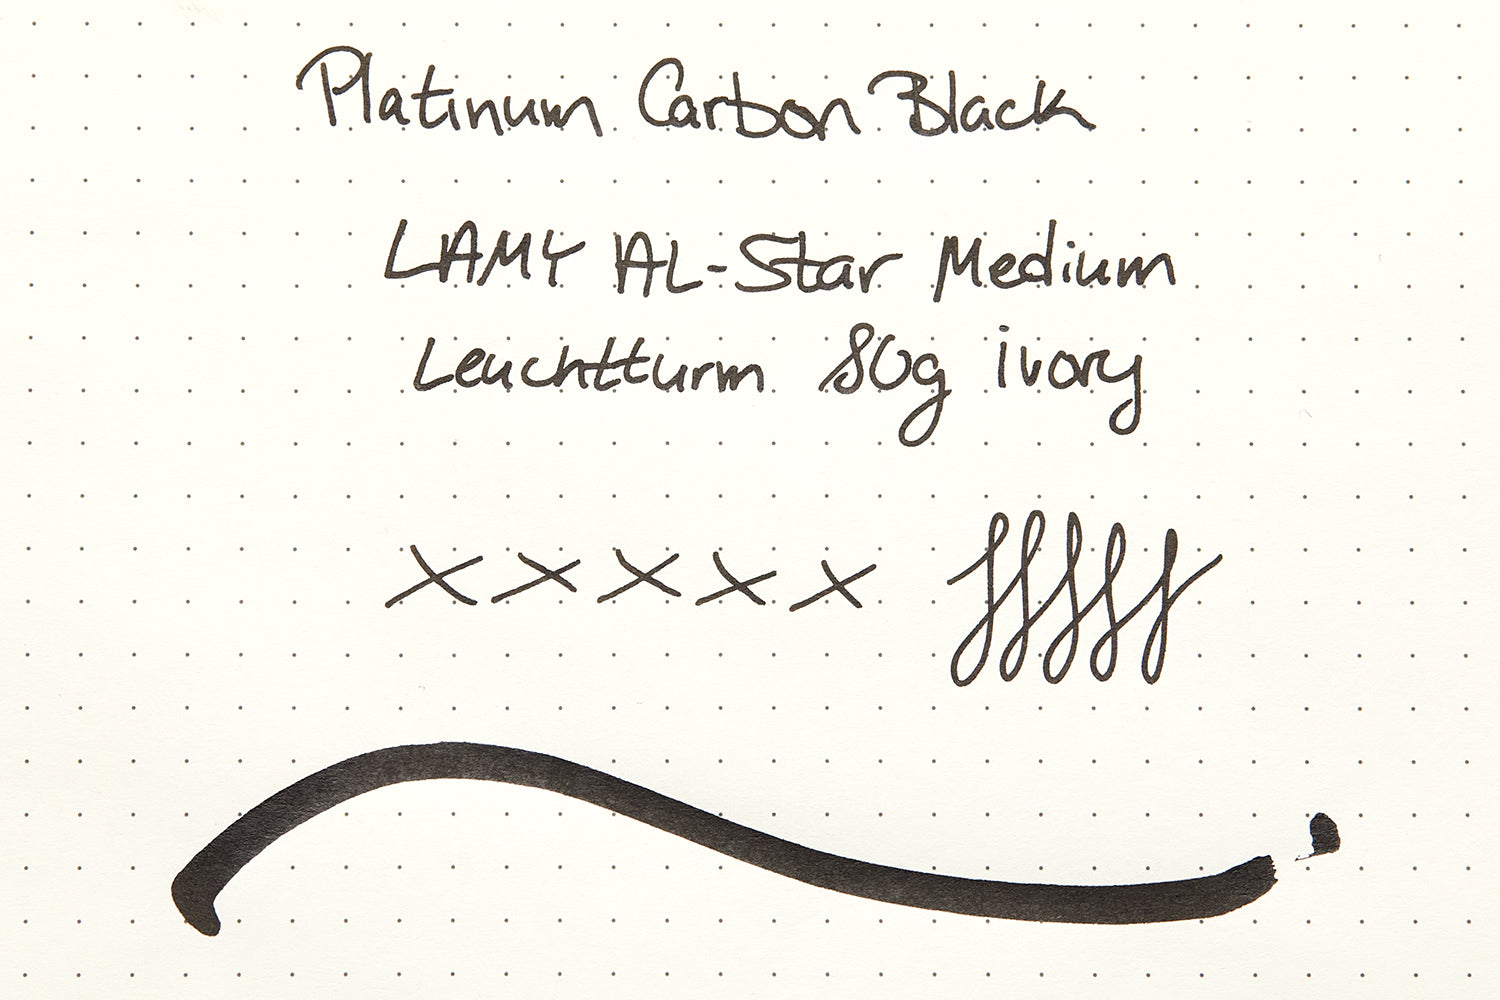 Ink Review #1066: Platinum Carbon Black — Mountain of Ink